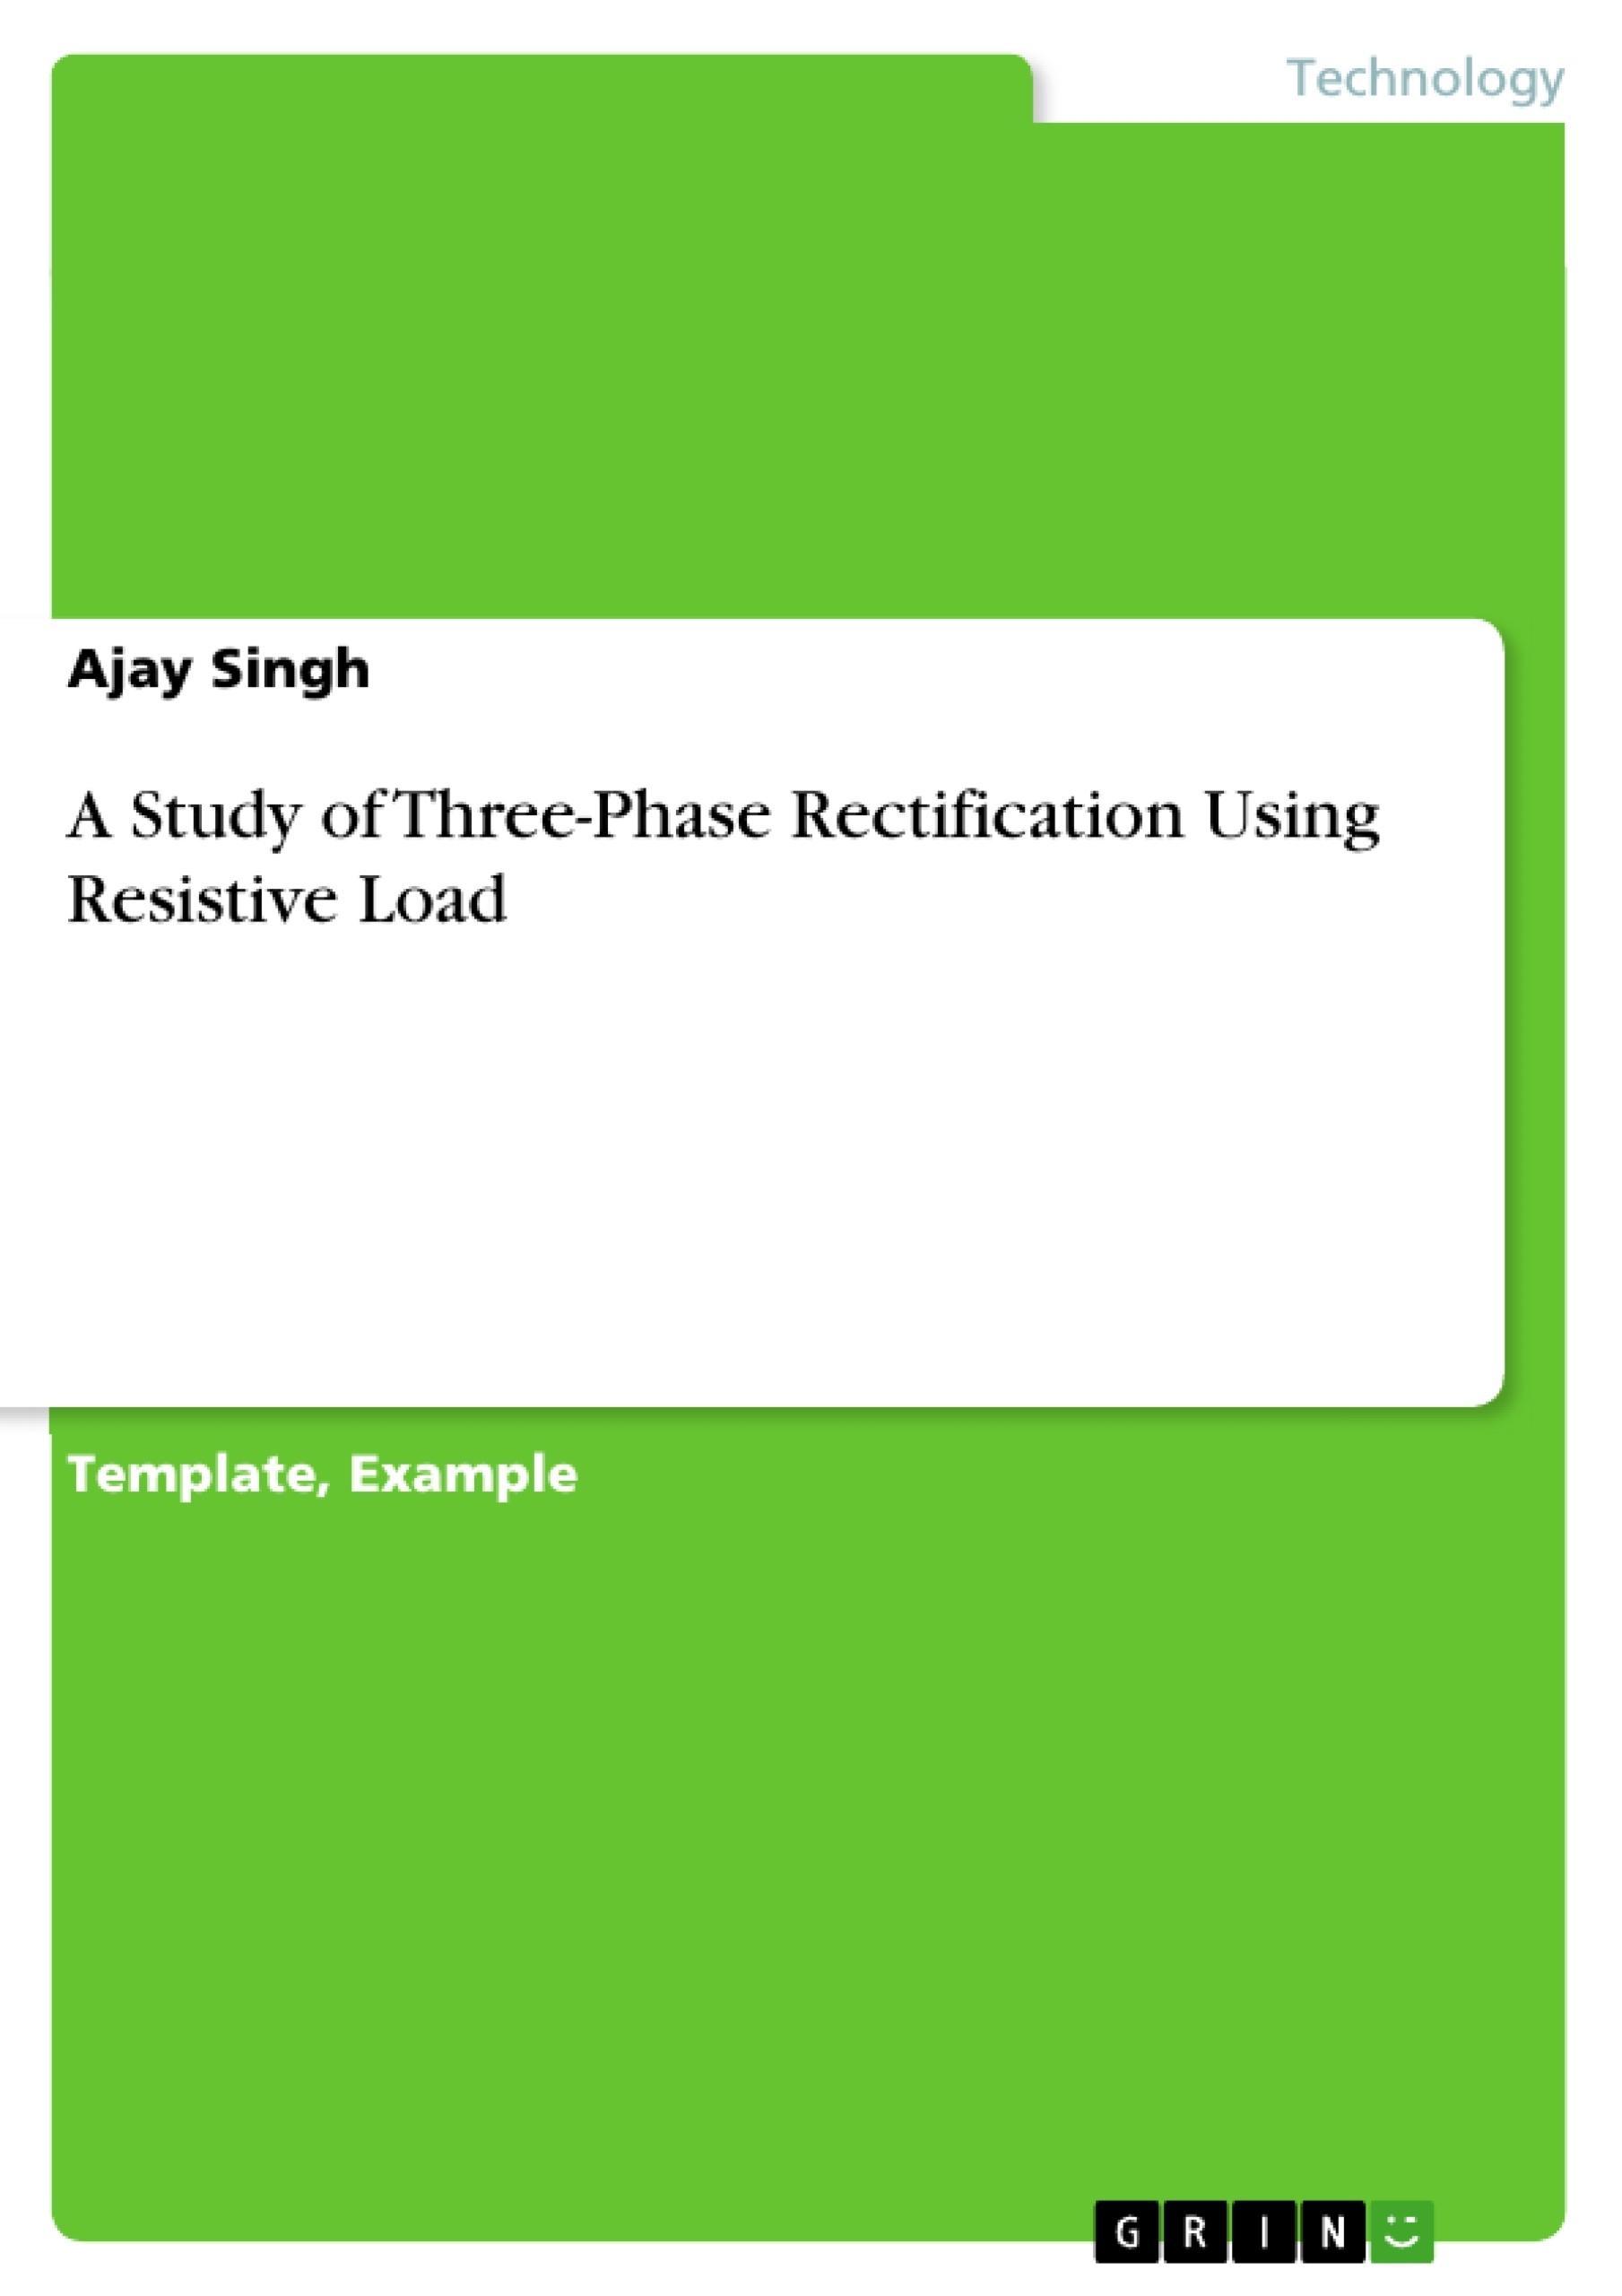 Título: A Study of Three-Phase Rectification Using Resistive Load